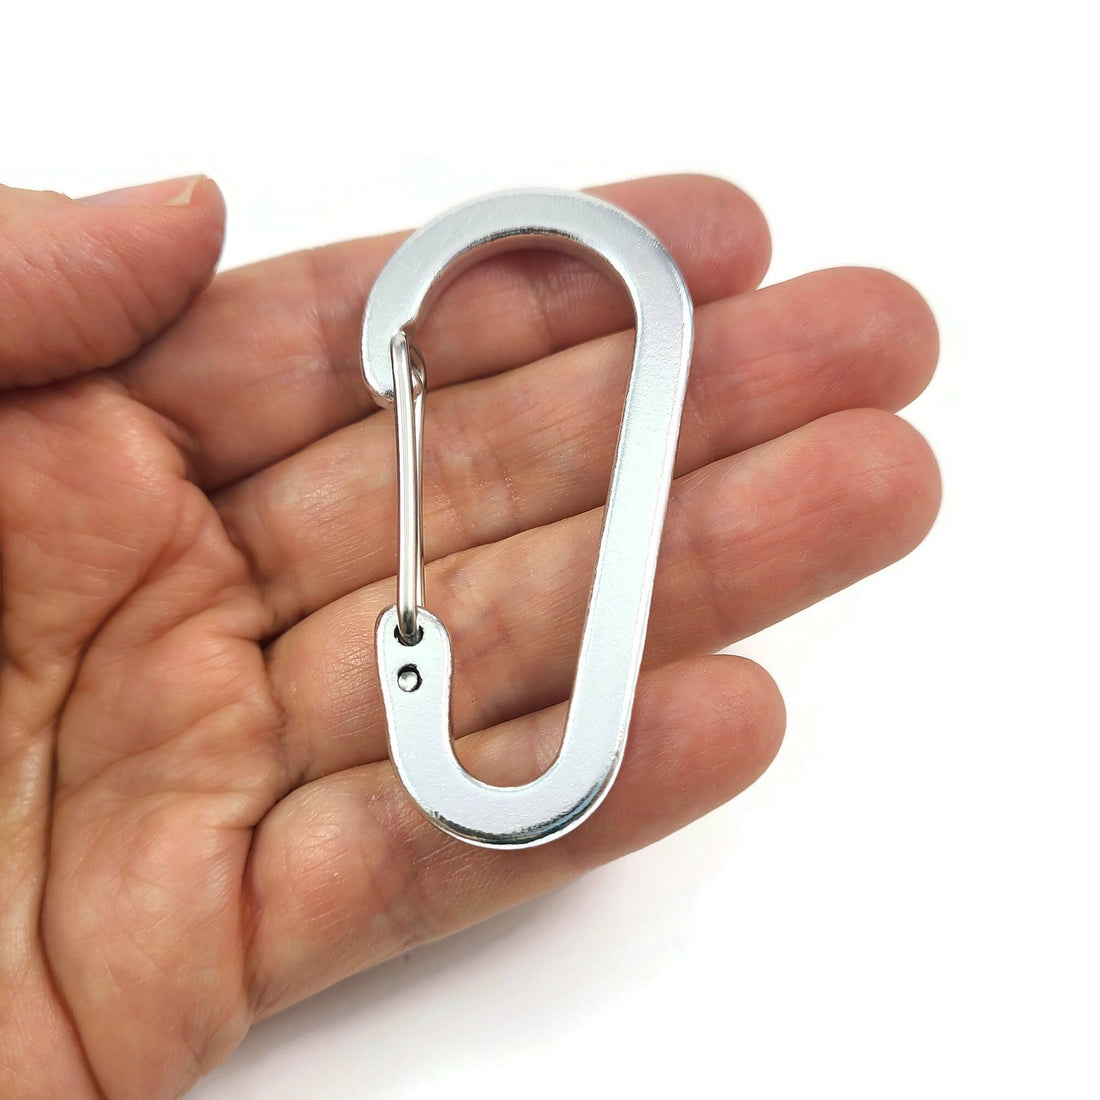 Large carabiner, Aluminum silver clasp, Bag charm, Bottle clip & key fob findings